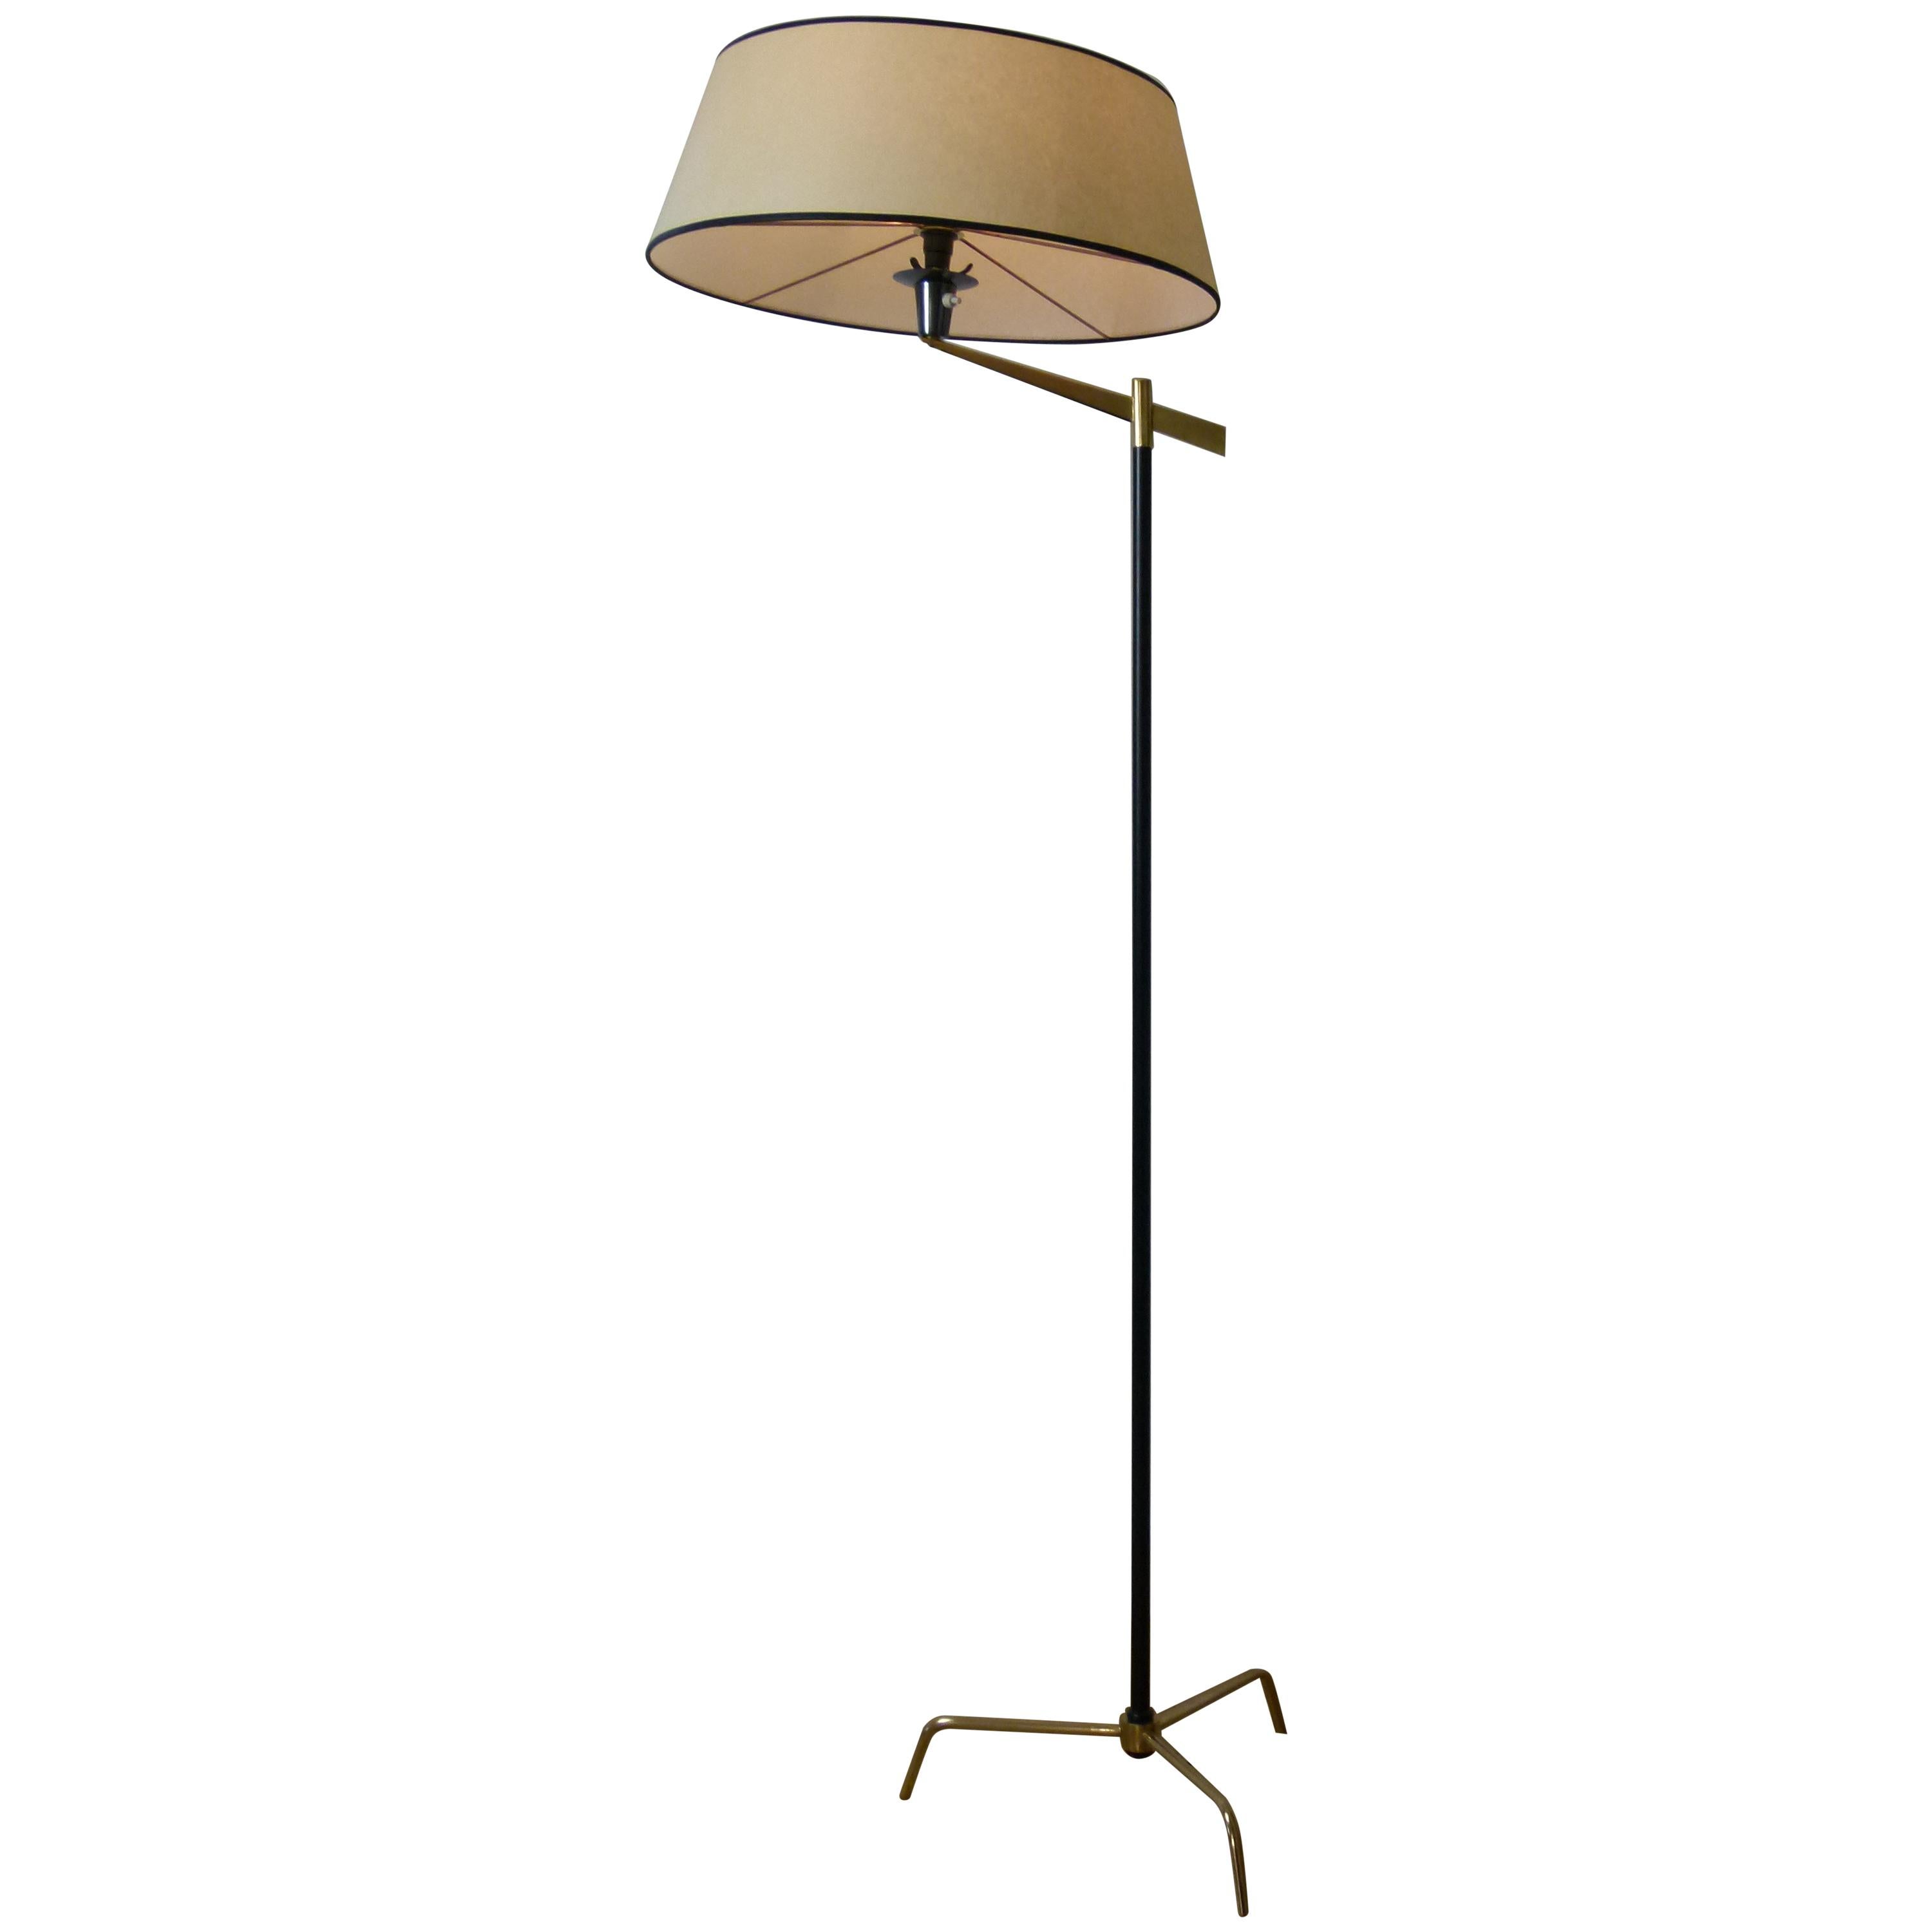 1950s Floor Lamp in Brass and Lacquered Metal from Maison Arlus